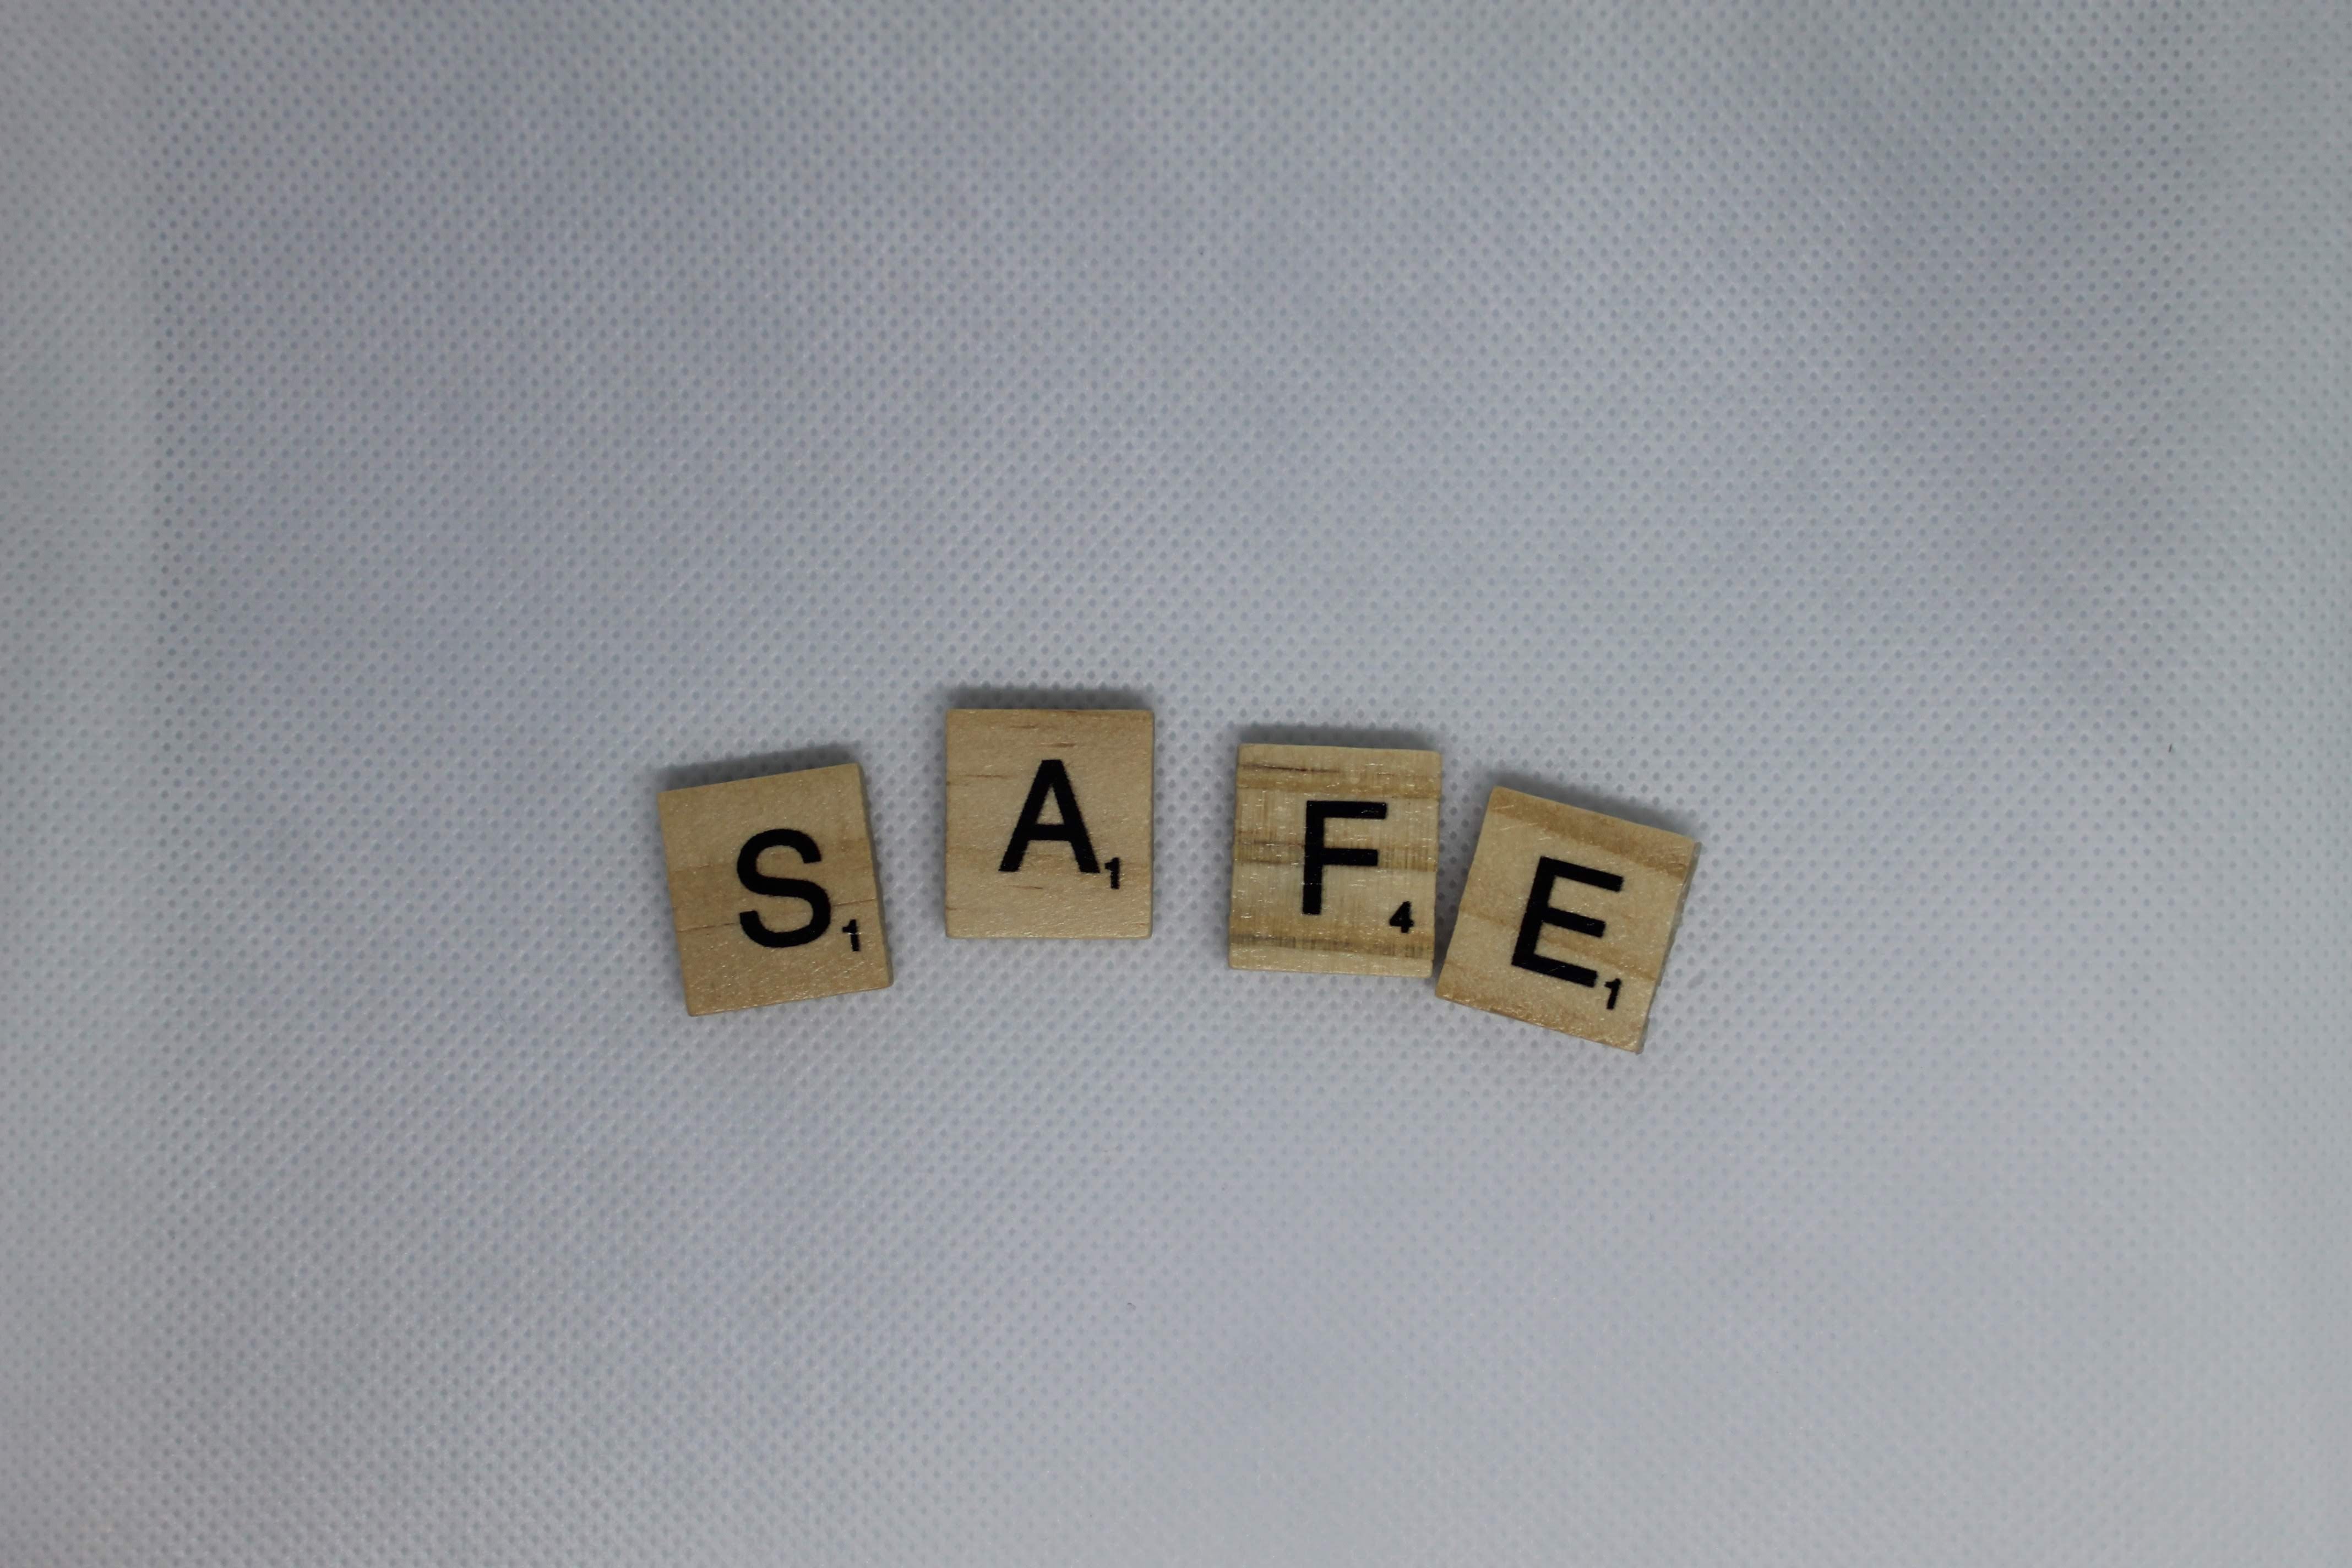 Safe spelled out in Scrabble tiles